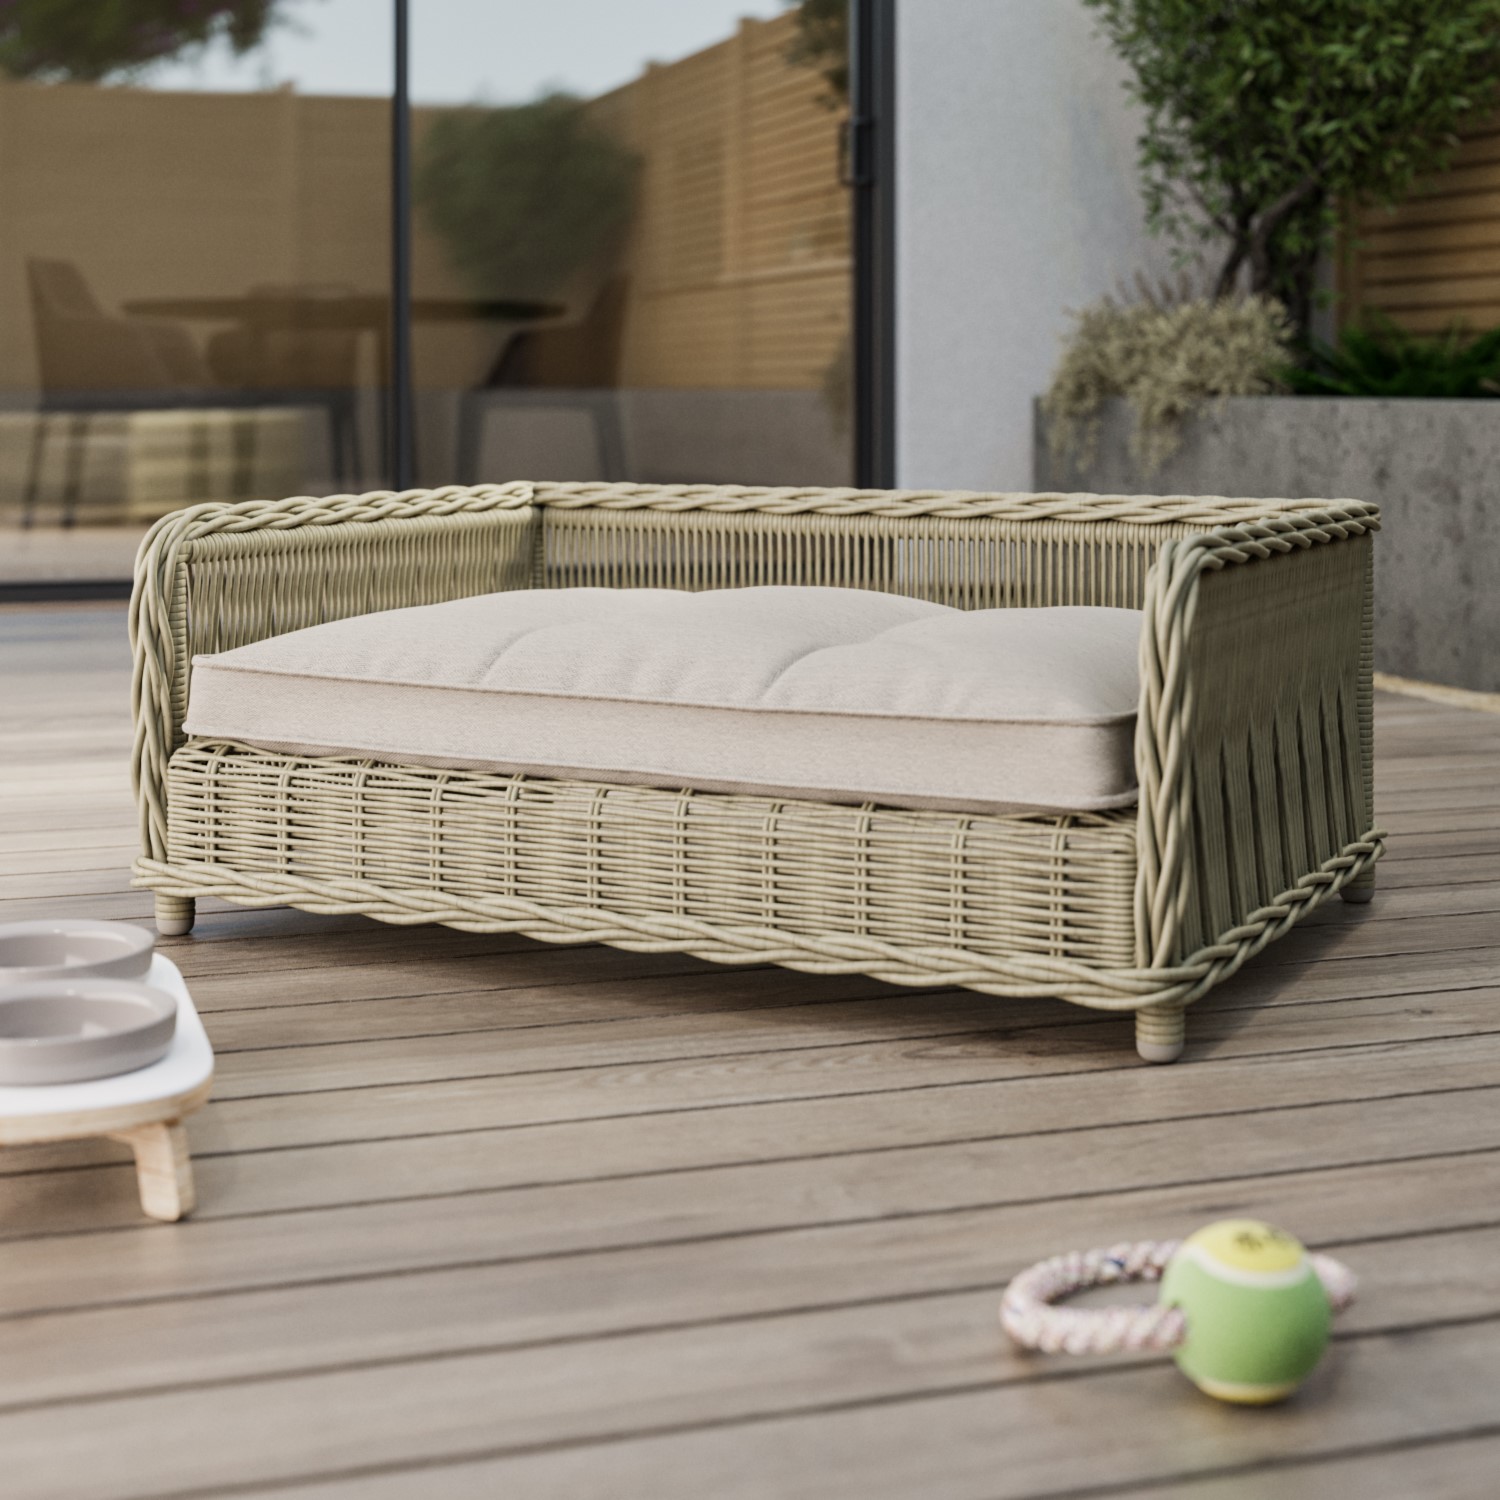 Read more about Large rattan outdoor pet bed